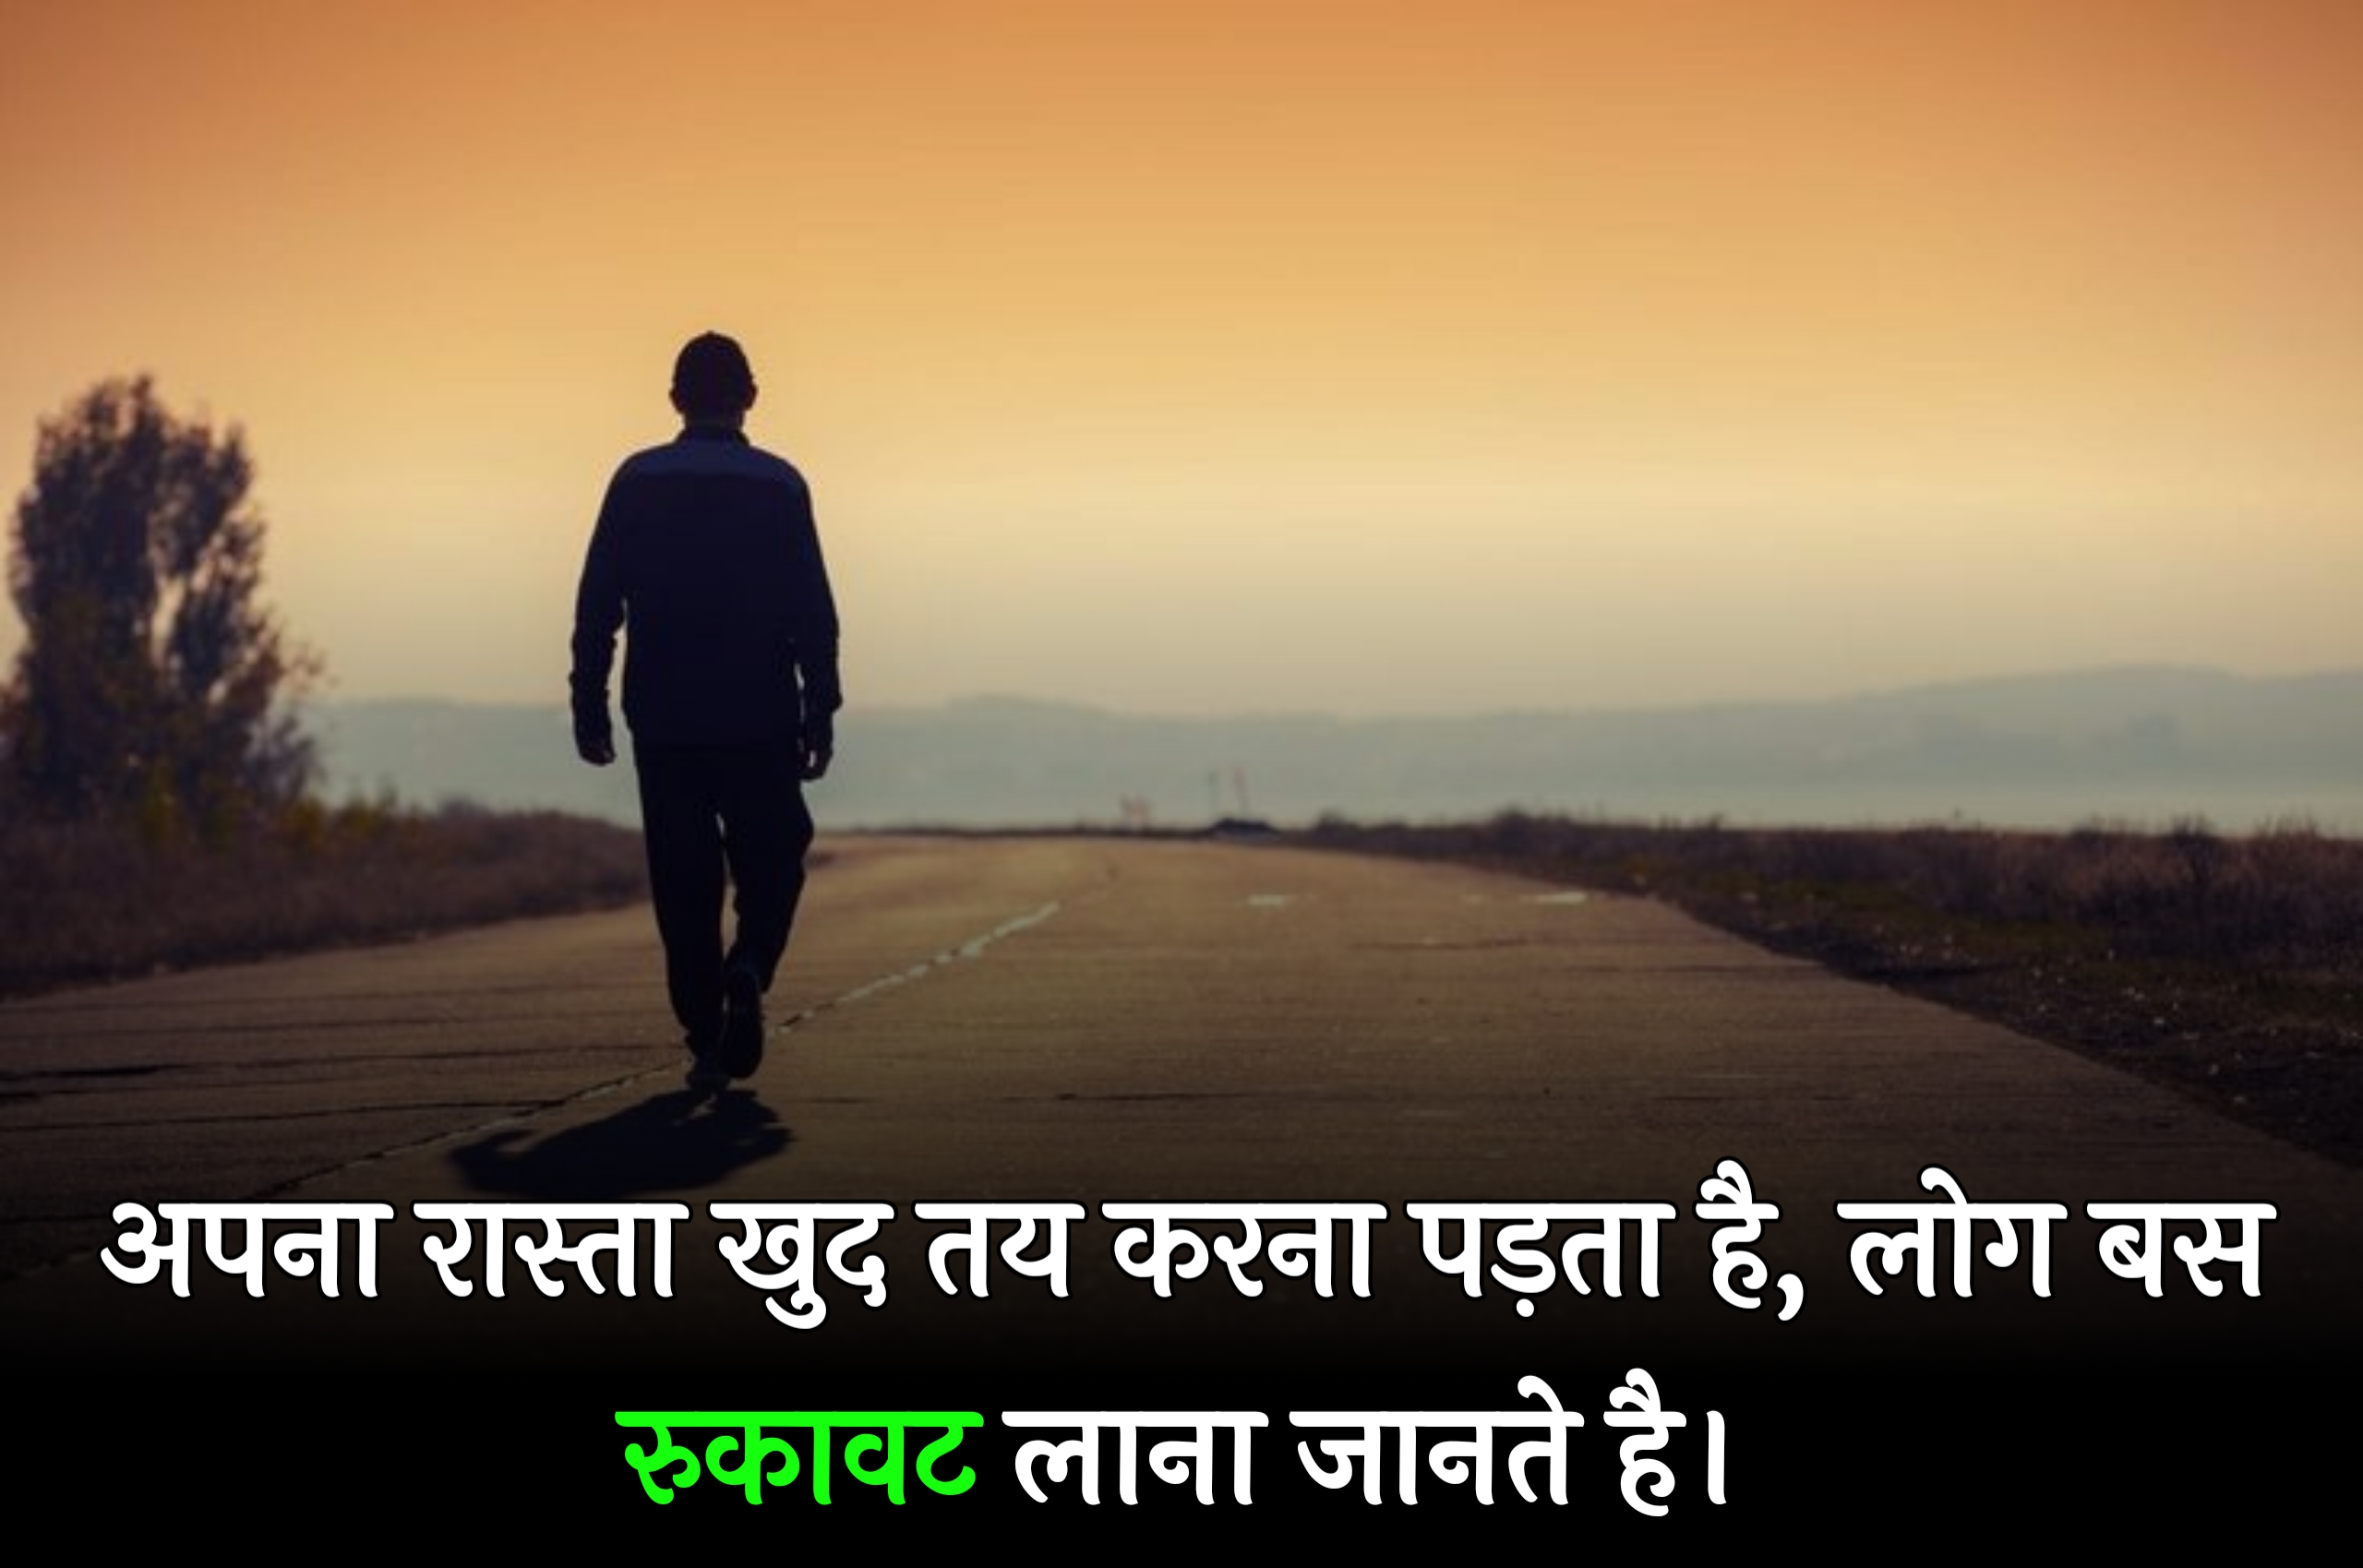 200 + Thought of the day in Hindi | थॉट ऑफ़ द डे इन हिंदी 2023,thought of the day in hindi and english,motivational thought of the day in hindi,thought of the day in hindi to english,thought of the day in hindi for students,thought of the day in hindi life,education thought of the day in hindi,thought of the day in hindi with meaning,best thought of the day in hindi,today thought of the day in hindi